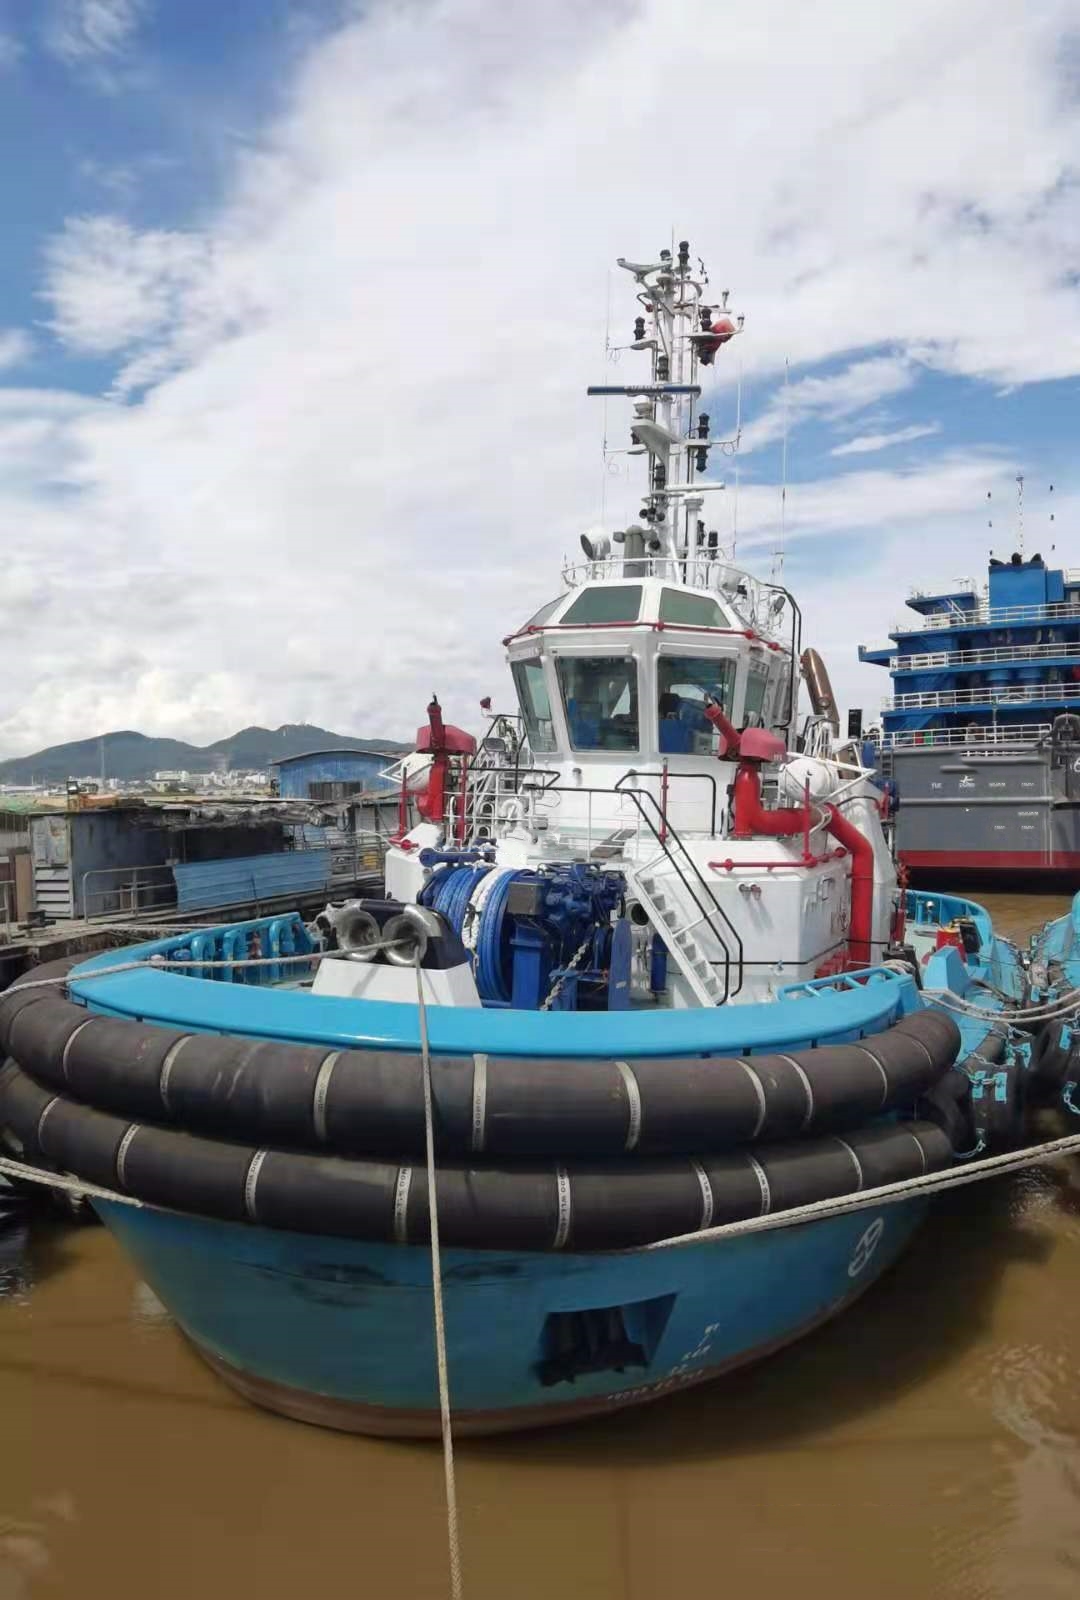 3434 PS Ocean-going Tug For Sale